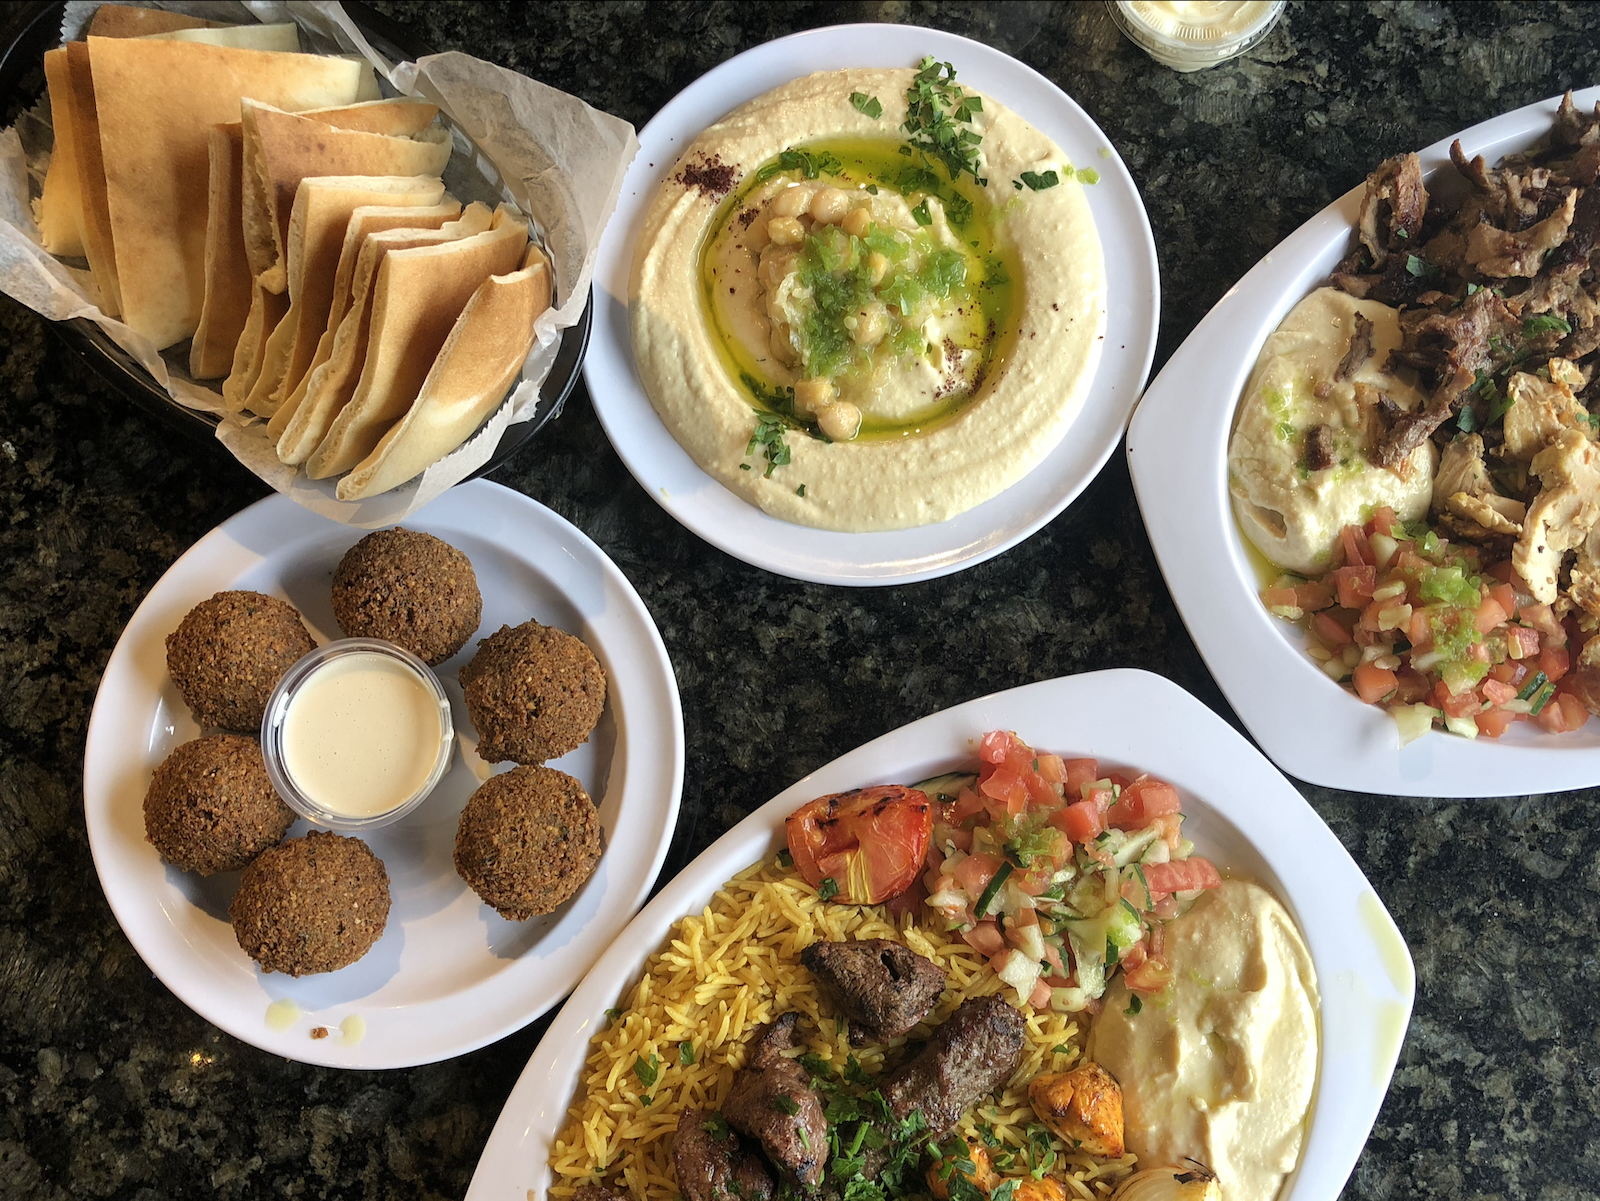 Dishes from Pita Palace